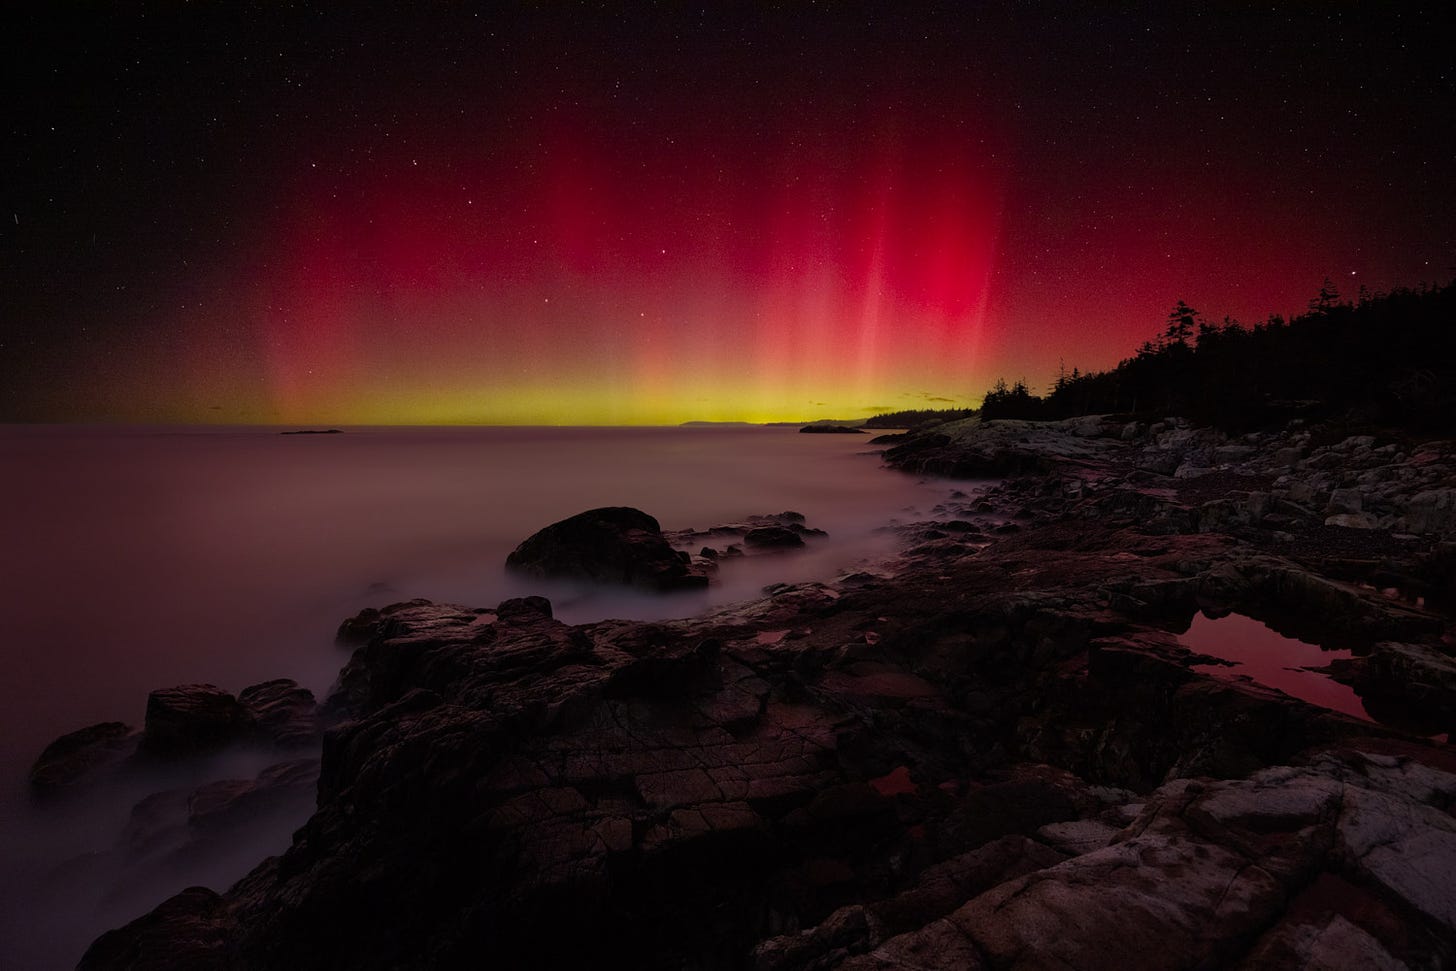 The Aurora Borealis, along with the Big Dipper, fill the horizon along the shores of Isle au Haut in Acadia National Park, Maine.